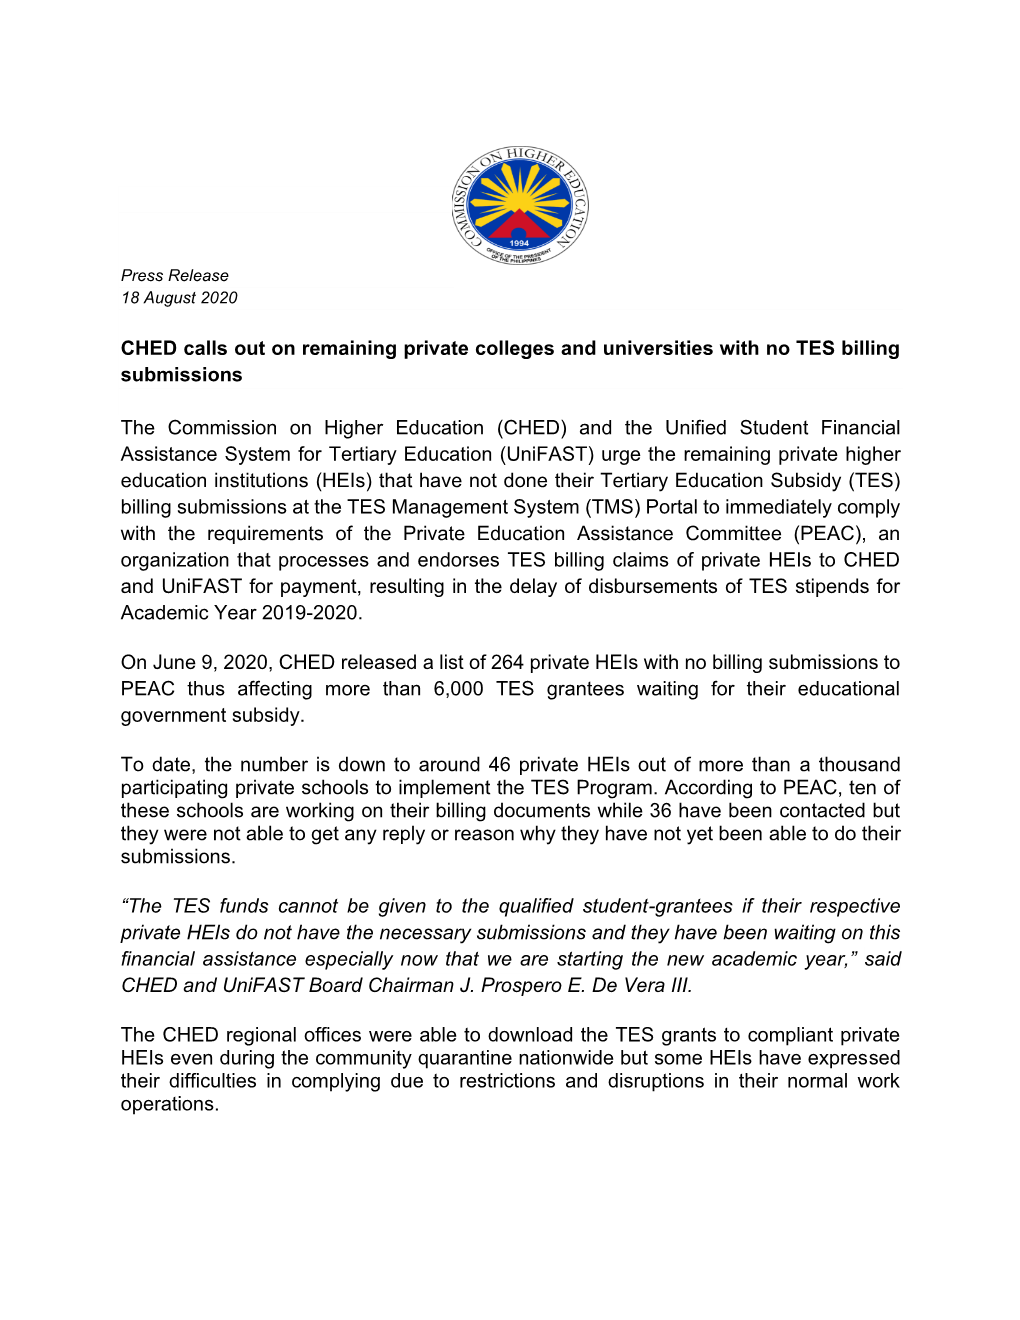 CHED Calls out on Remaining Private Colleges and Universities with No TES Billing Submissions